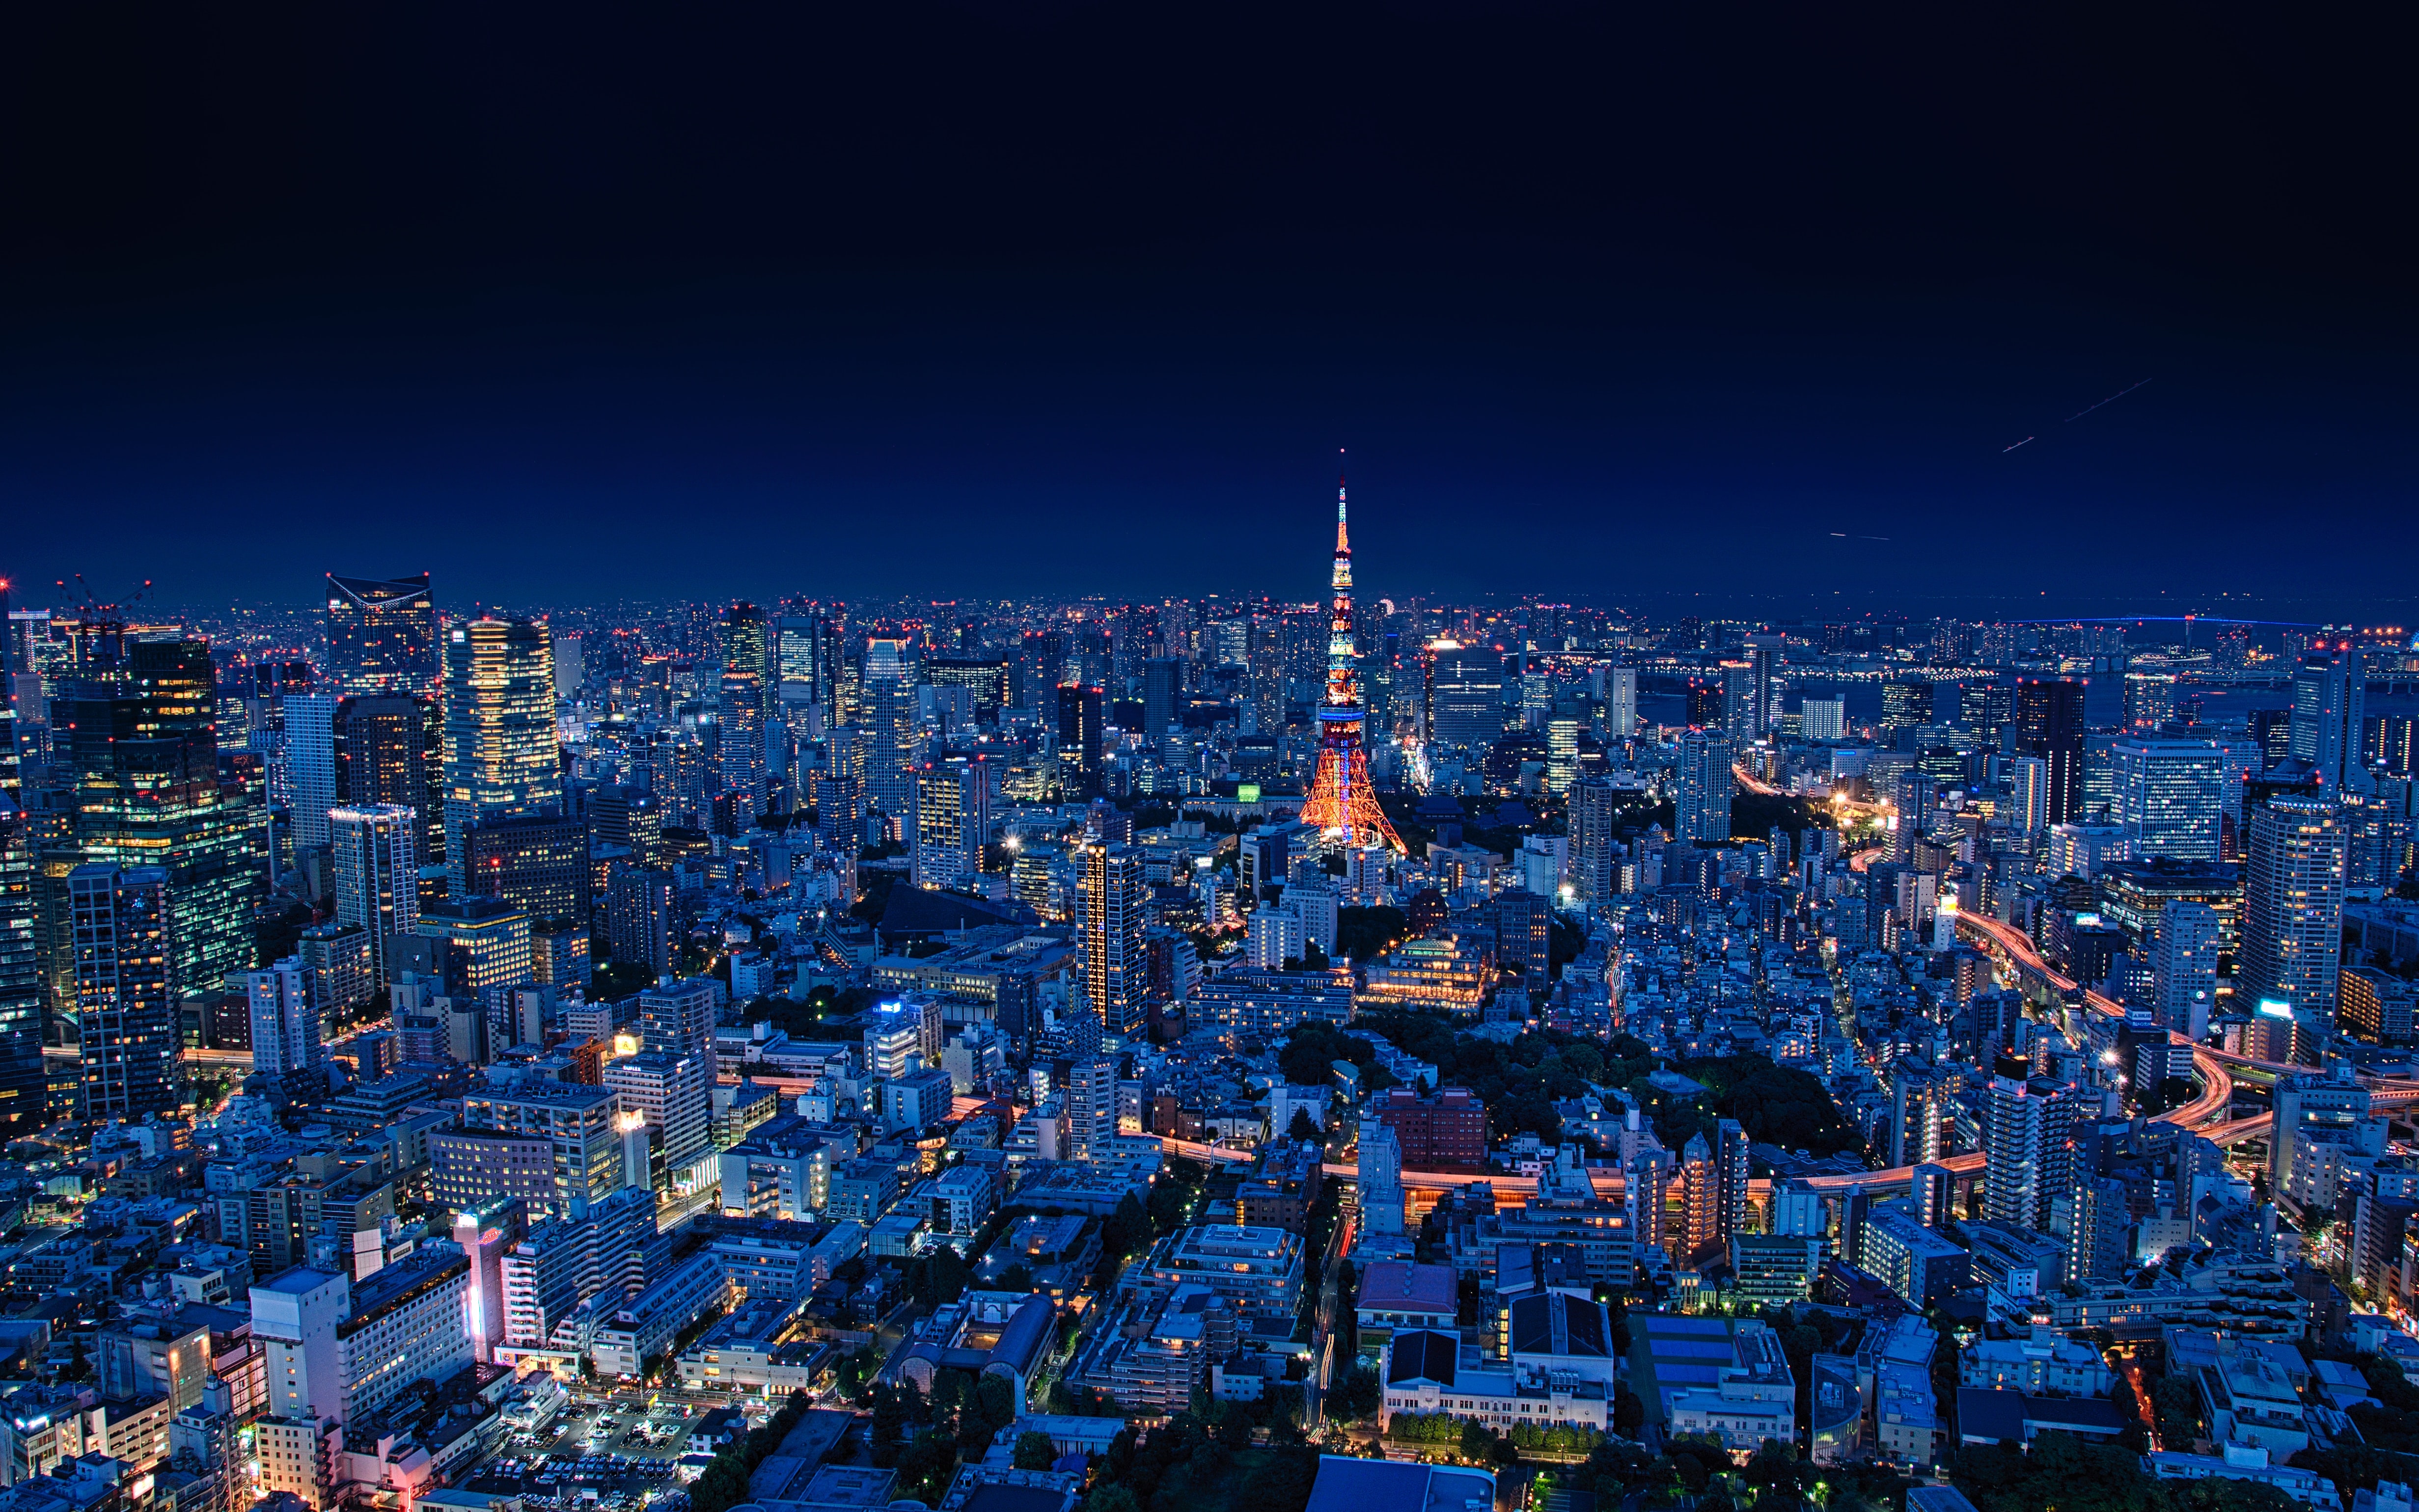 japan, overview, tokyo, view from above, night city, architecture, cities, building, review cellphone